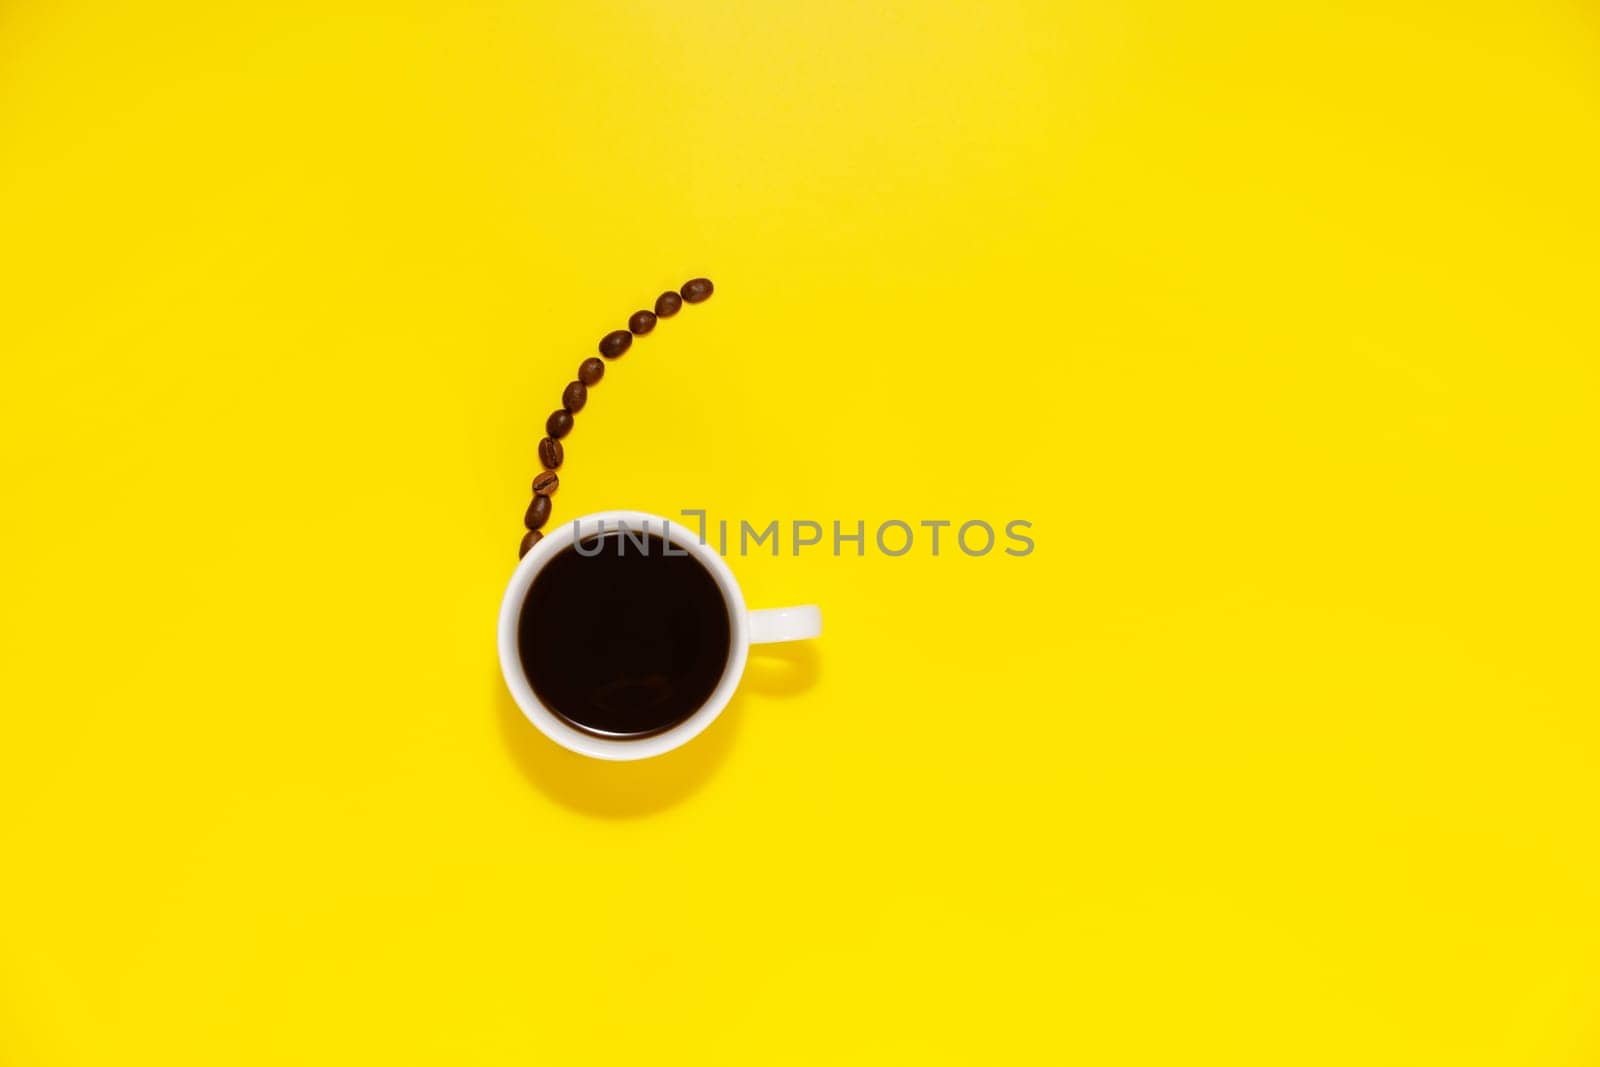 Cup of coffee and coffee bean on a yellow background, with space for copy text.